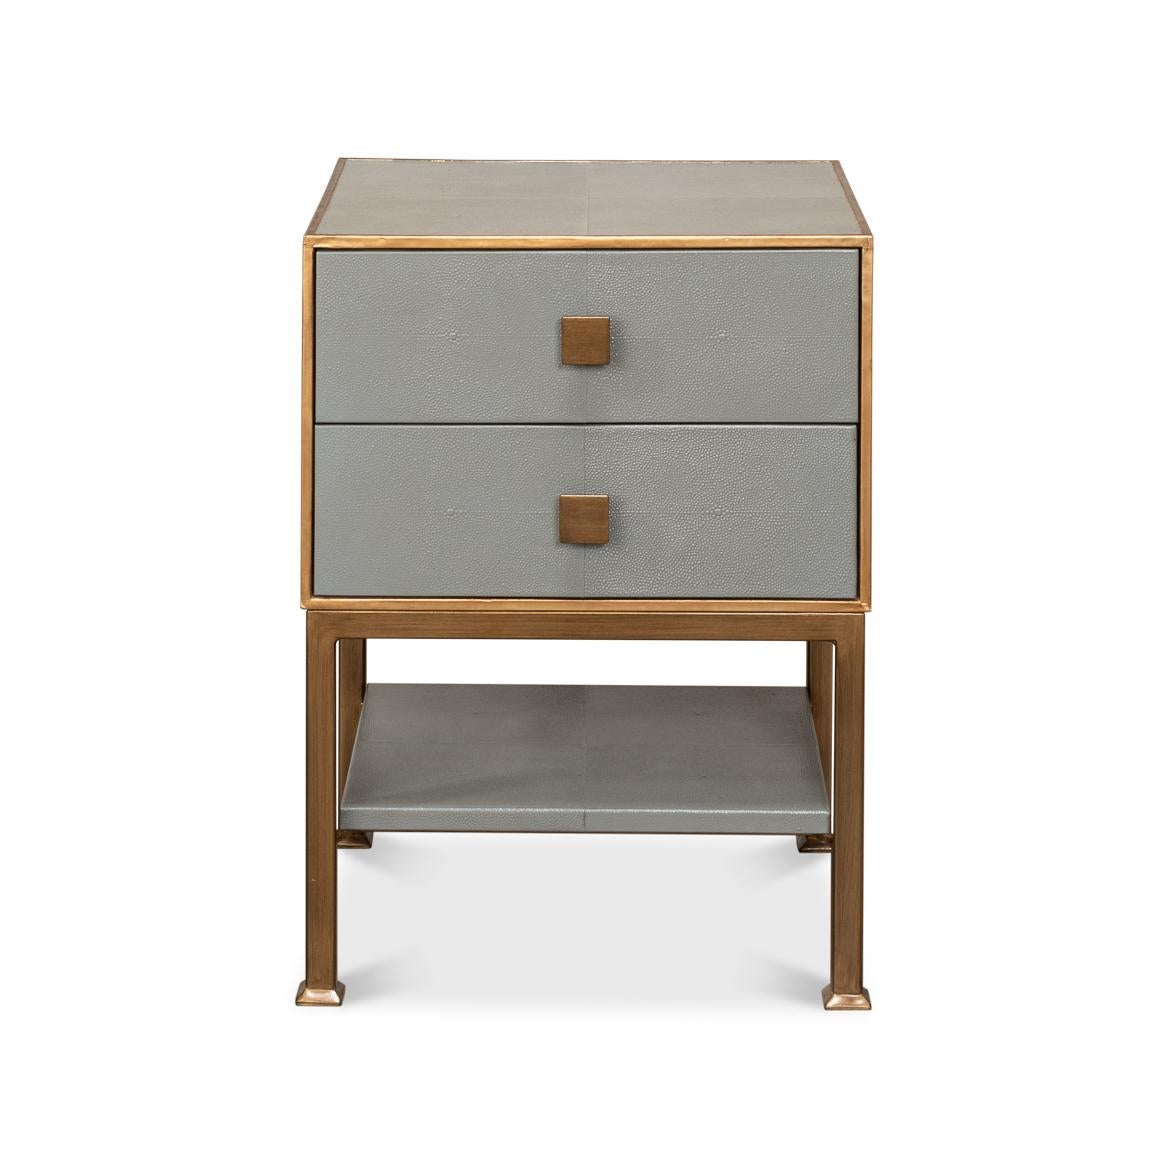 A streamlined design with its sleek embossed leather framed in a lustrous gilt finish. The two stacked drawers, adorned with simple square pulls, offer a discreet storage solution, while the lower shelf is perfect for stacking books or displaying